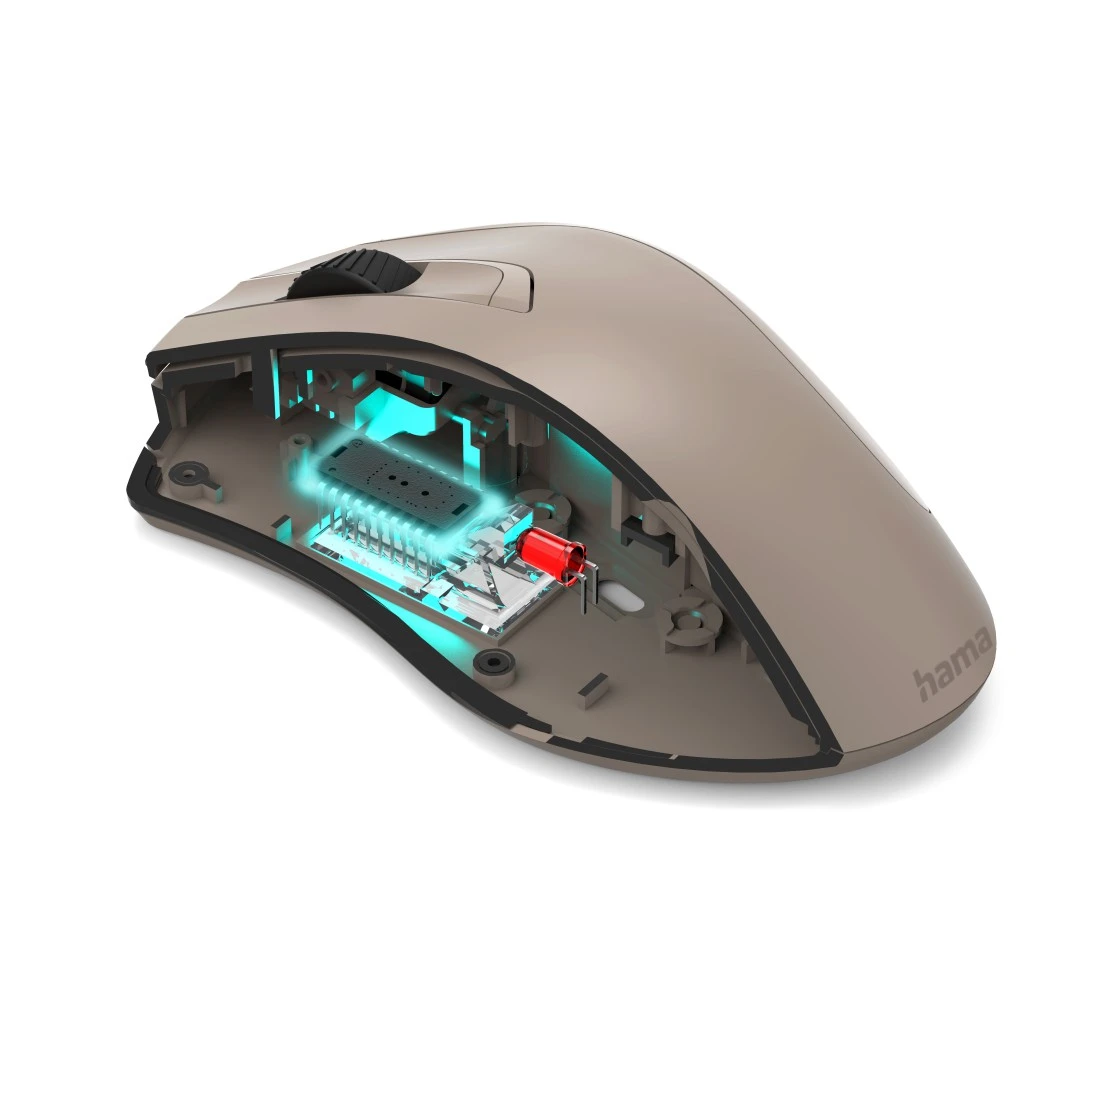 Hama 00173019 MW-900 V2 7-Button Laser Wireless Mouse, beige